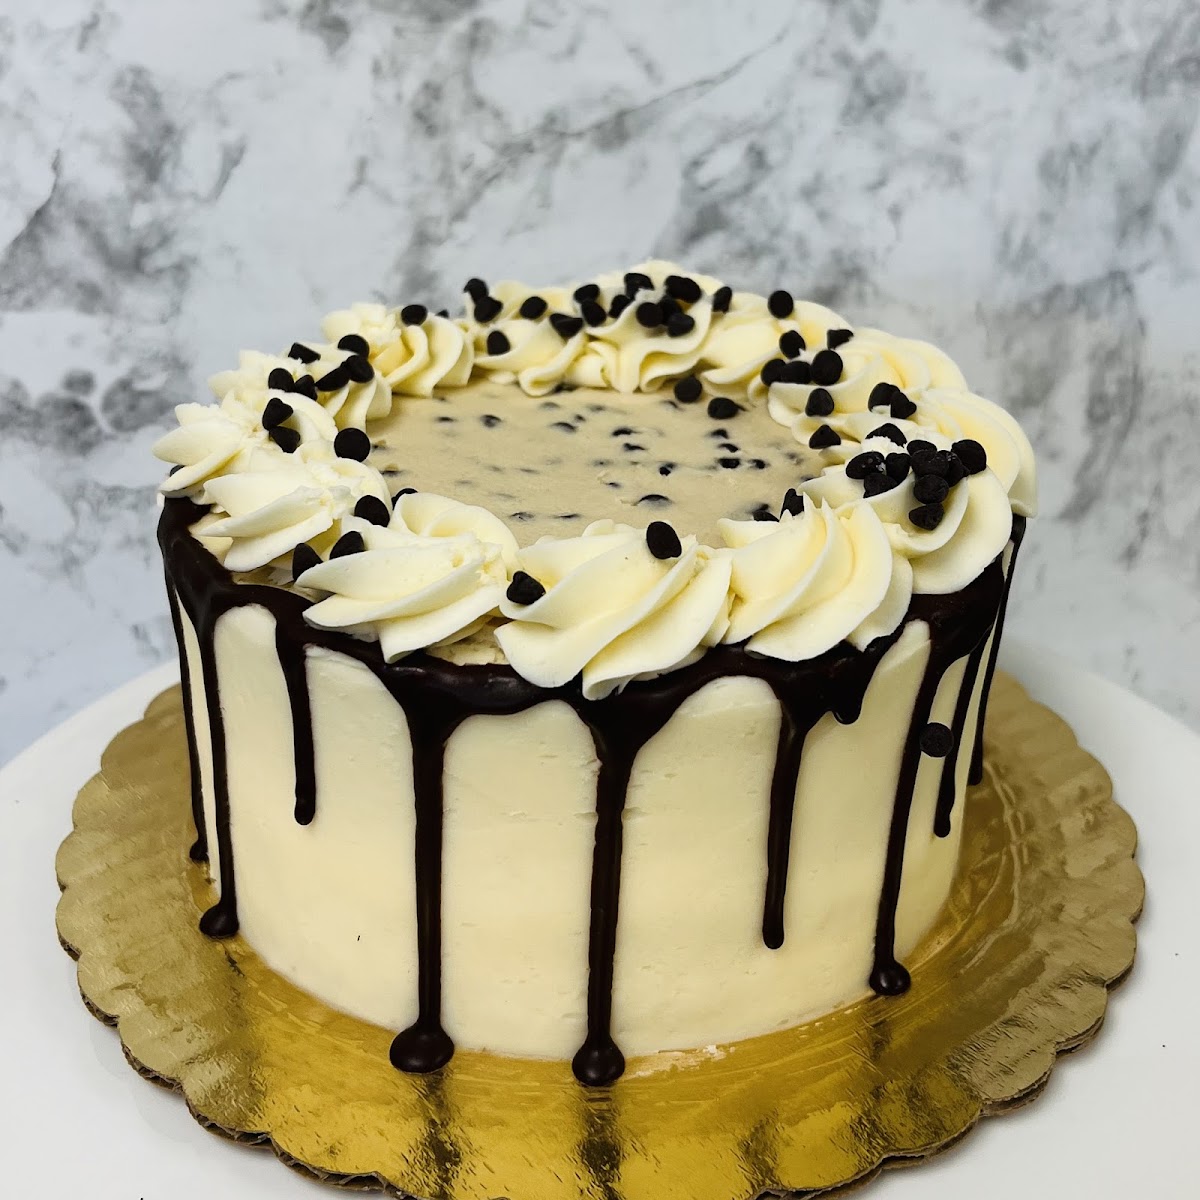 Our 6" frozen Signature Cakes are perfect for last minute celebrations!  Available in several varieties including Cookie Dough (pictured).